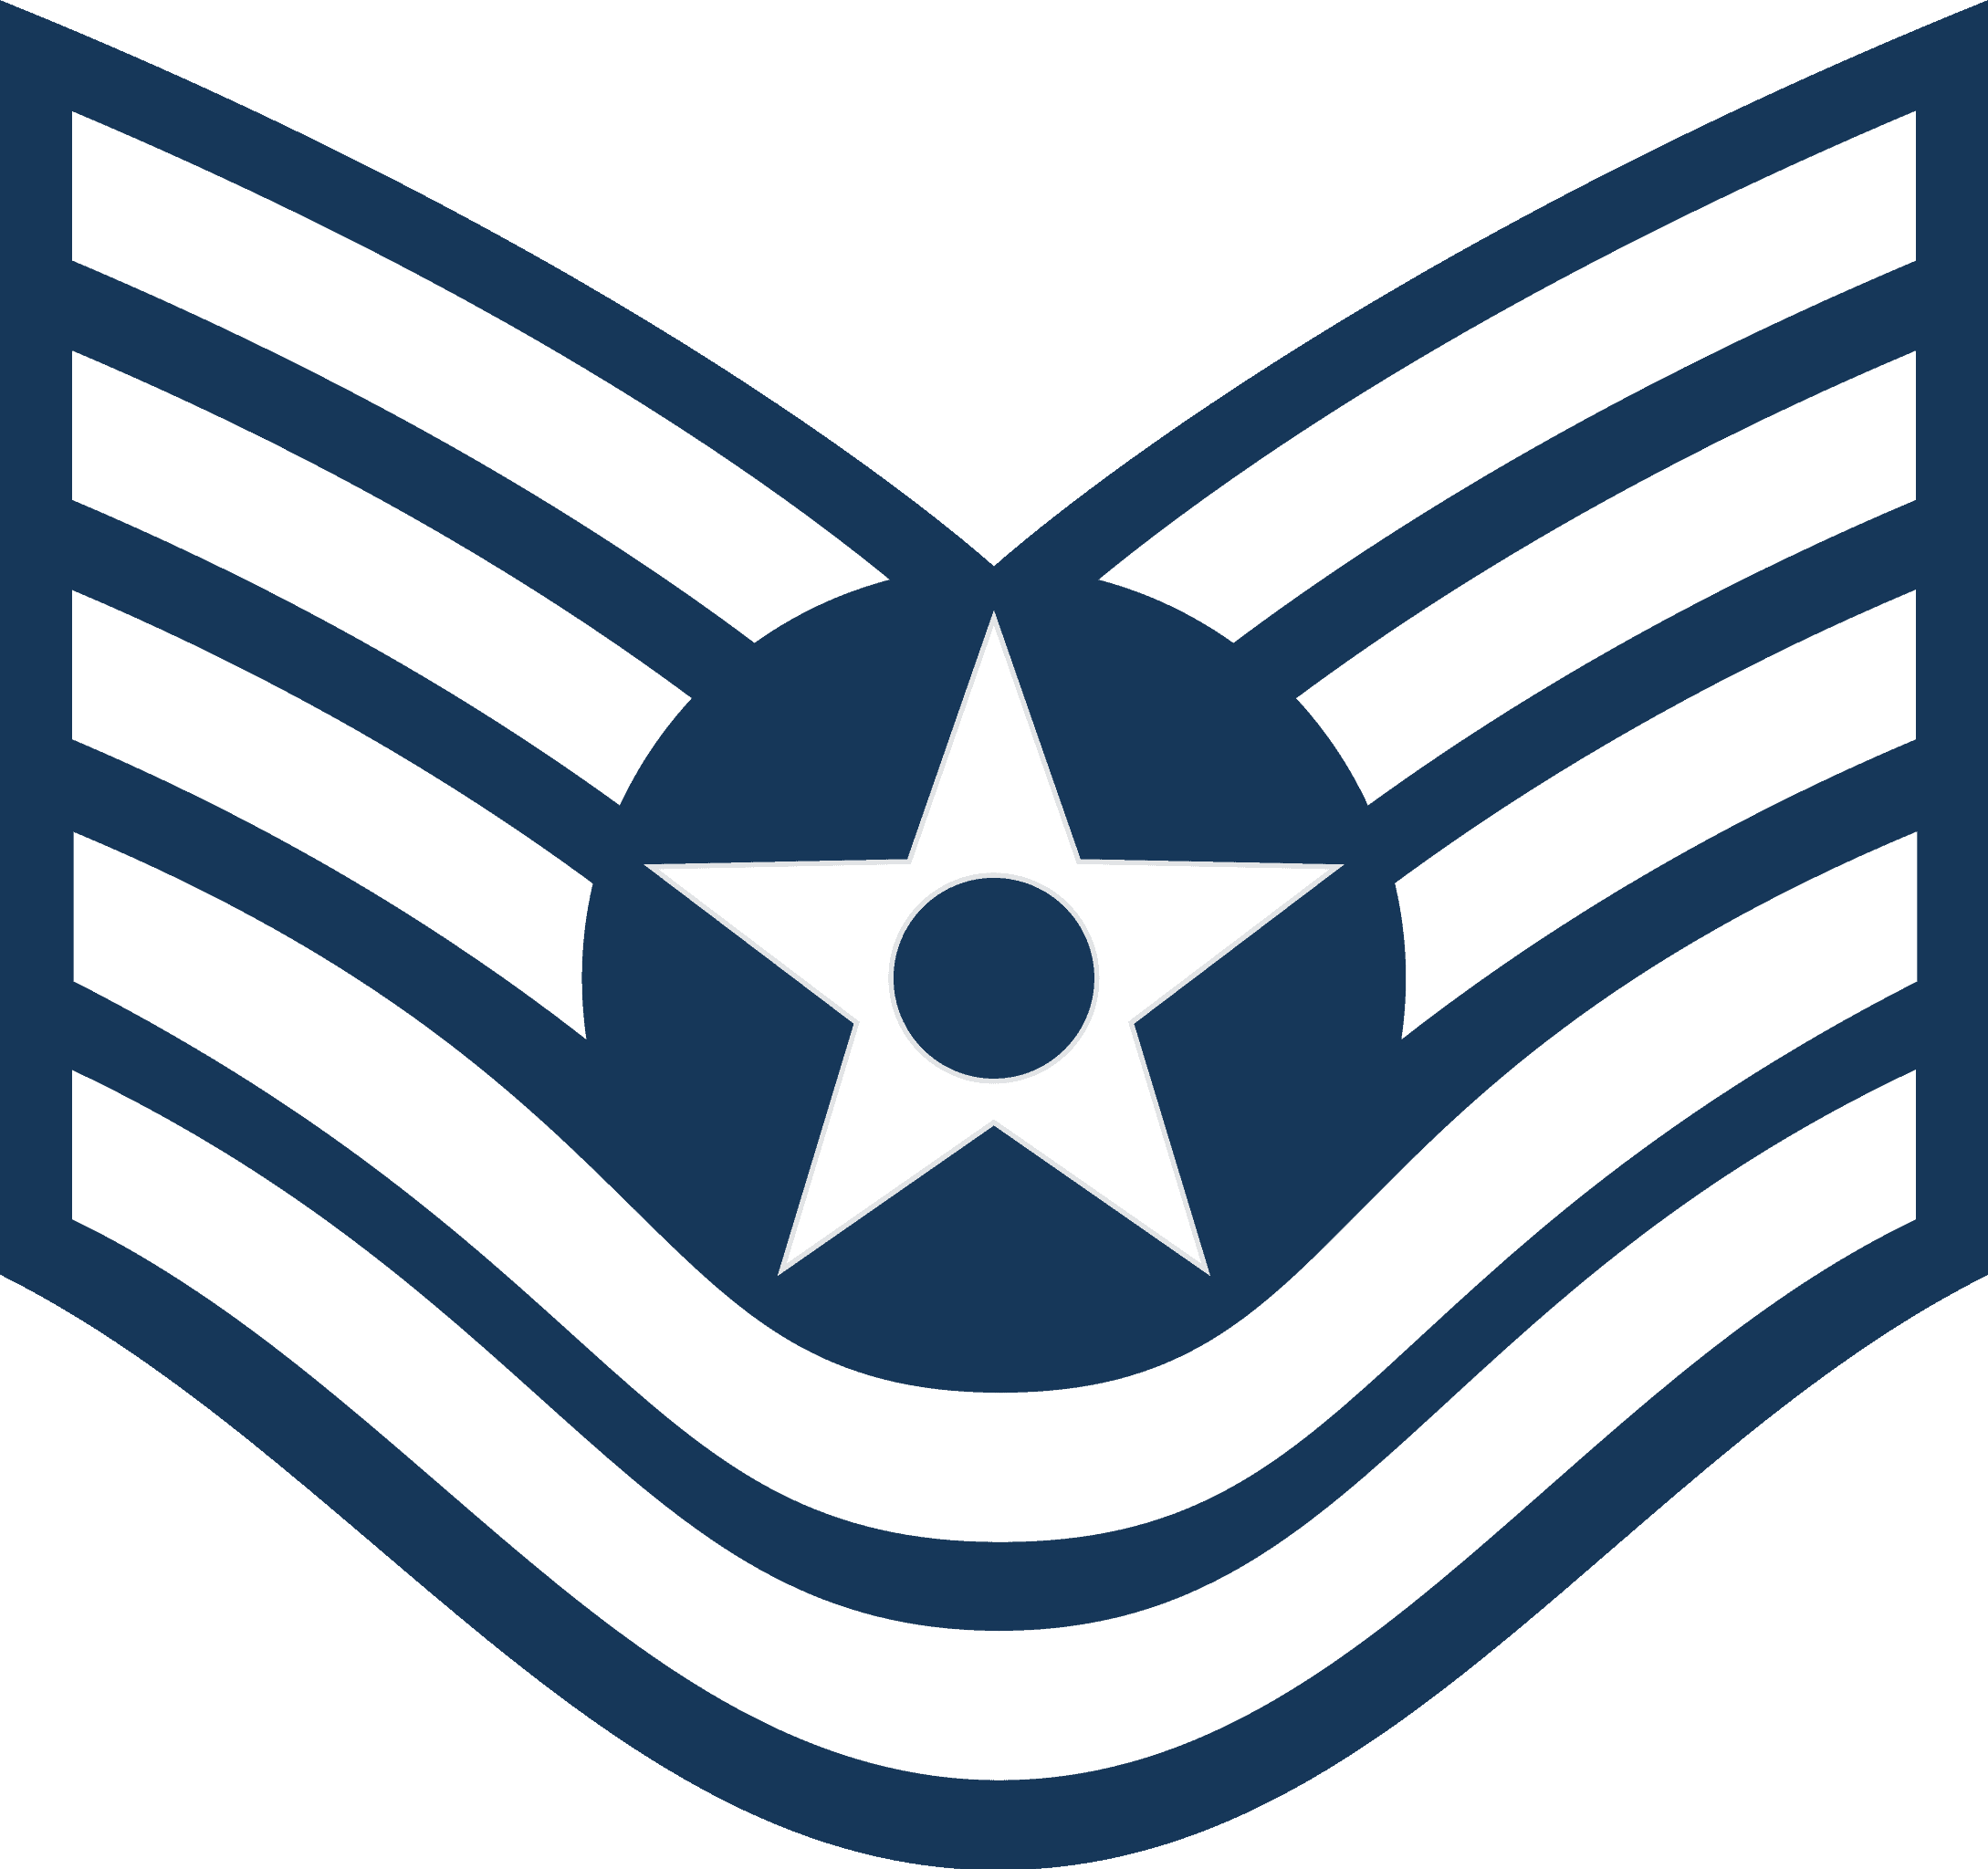 <p>An E-6 Technical Sergeant is a non-commissioned officer expected to have started developing leadership skills and writing performance reports. At this rank, earnings range between $37,627 and $58,277 per year are expected.</p><p><span>Would you please let us know what you think about our content? <p>Agree? Tell us by clicking the “Thumbs Up” button above.</p> Disagree? Leave a comment telling us what you’d change.</span></p>